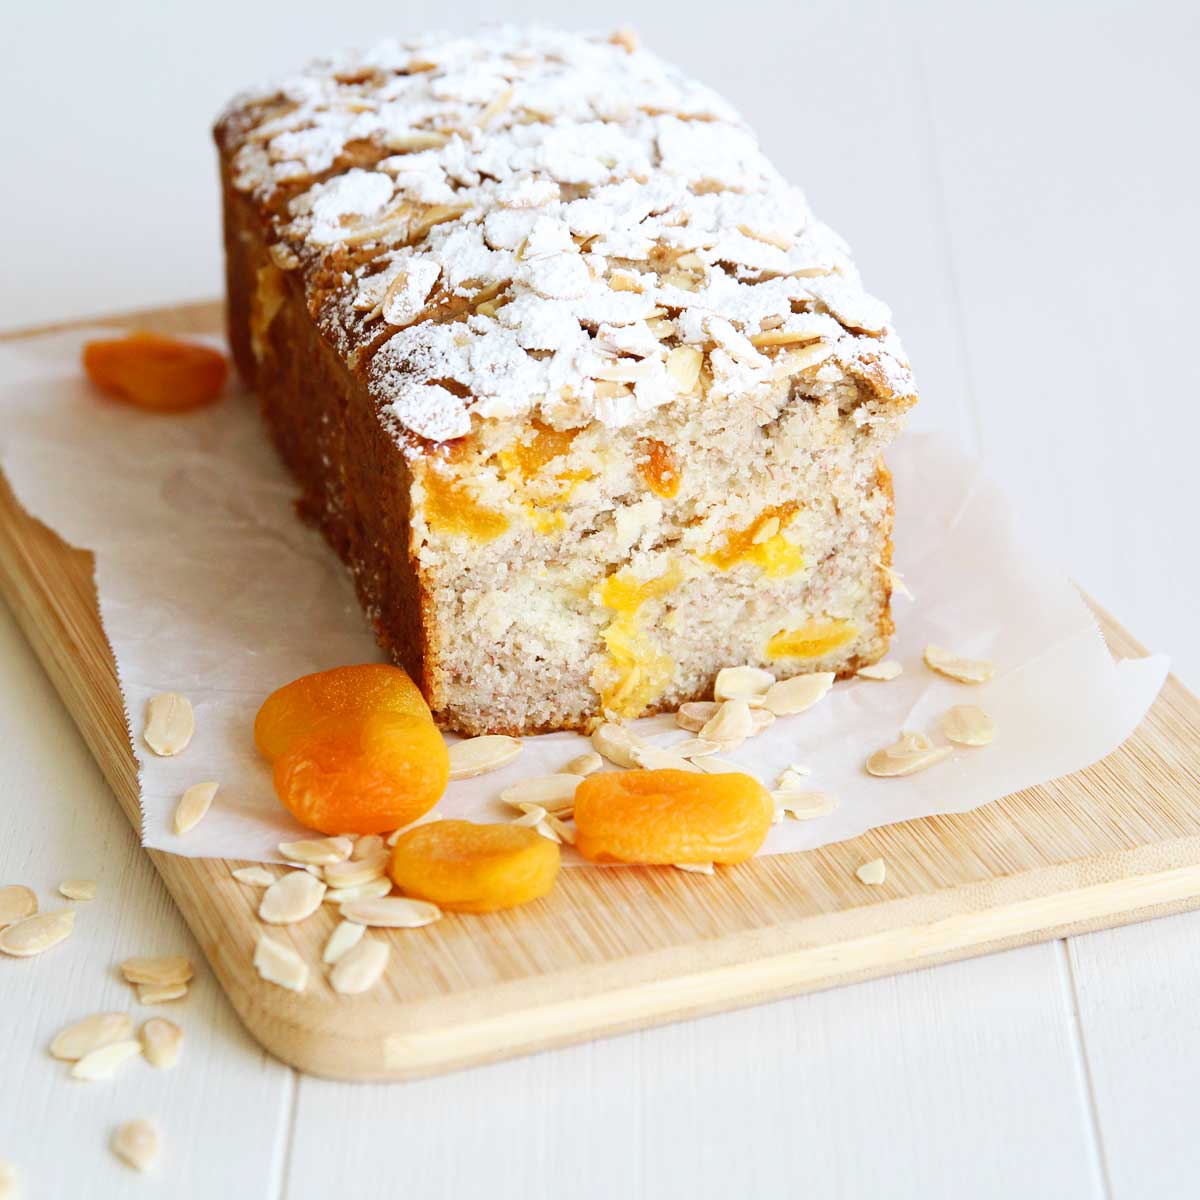 Simply Divine: Moist Vegan Almond Banana Bread with Apricots (Eggless, Dairy Free!) - Peppermint Whipped Cream